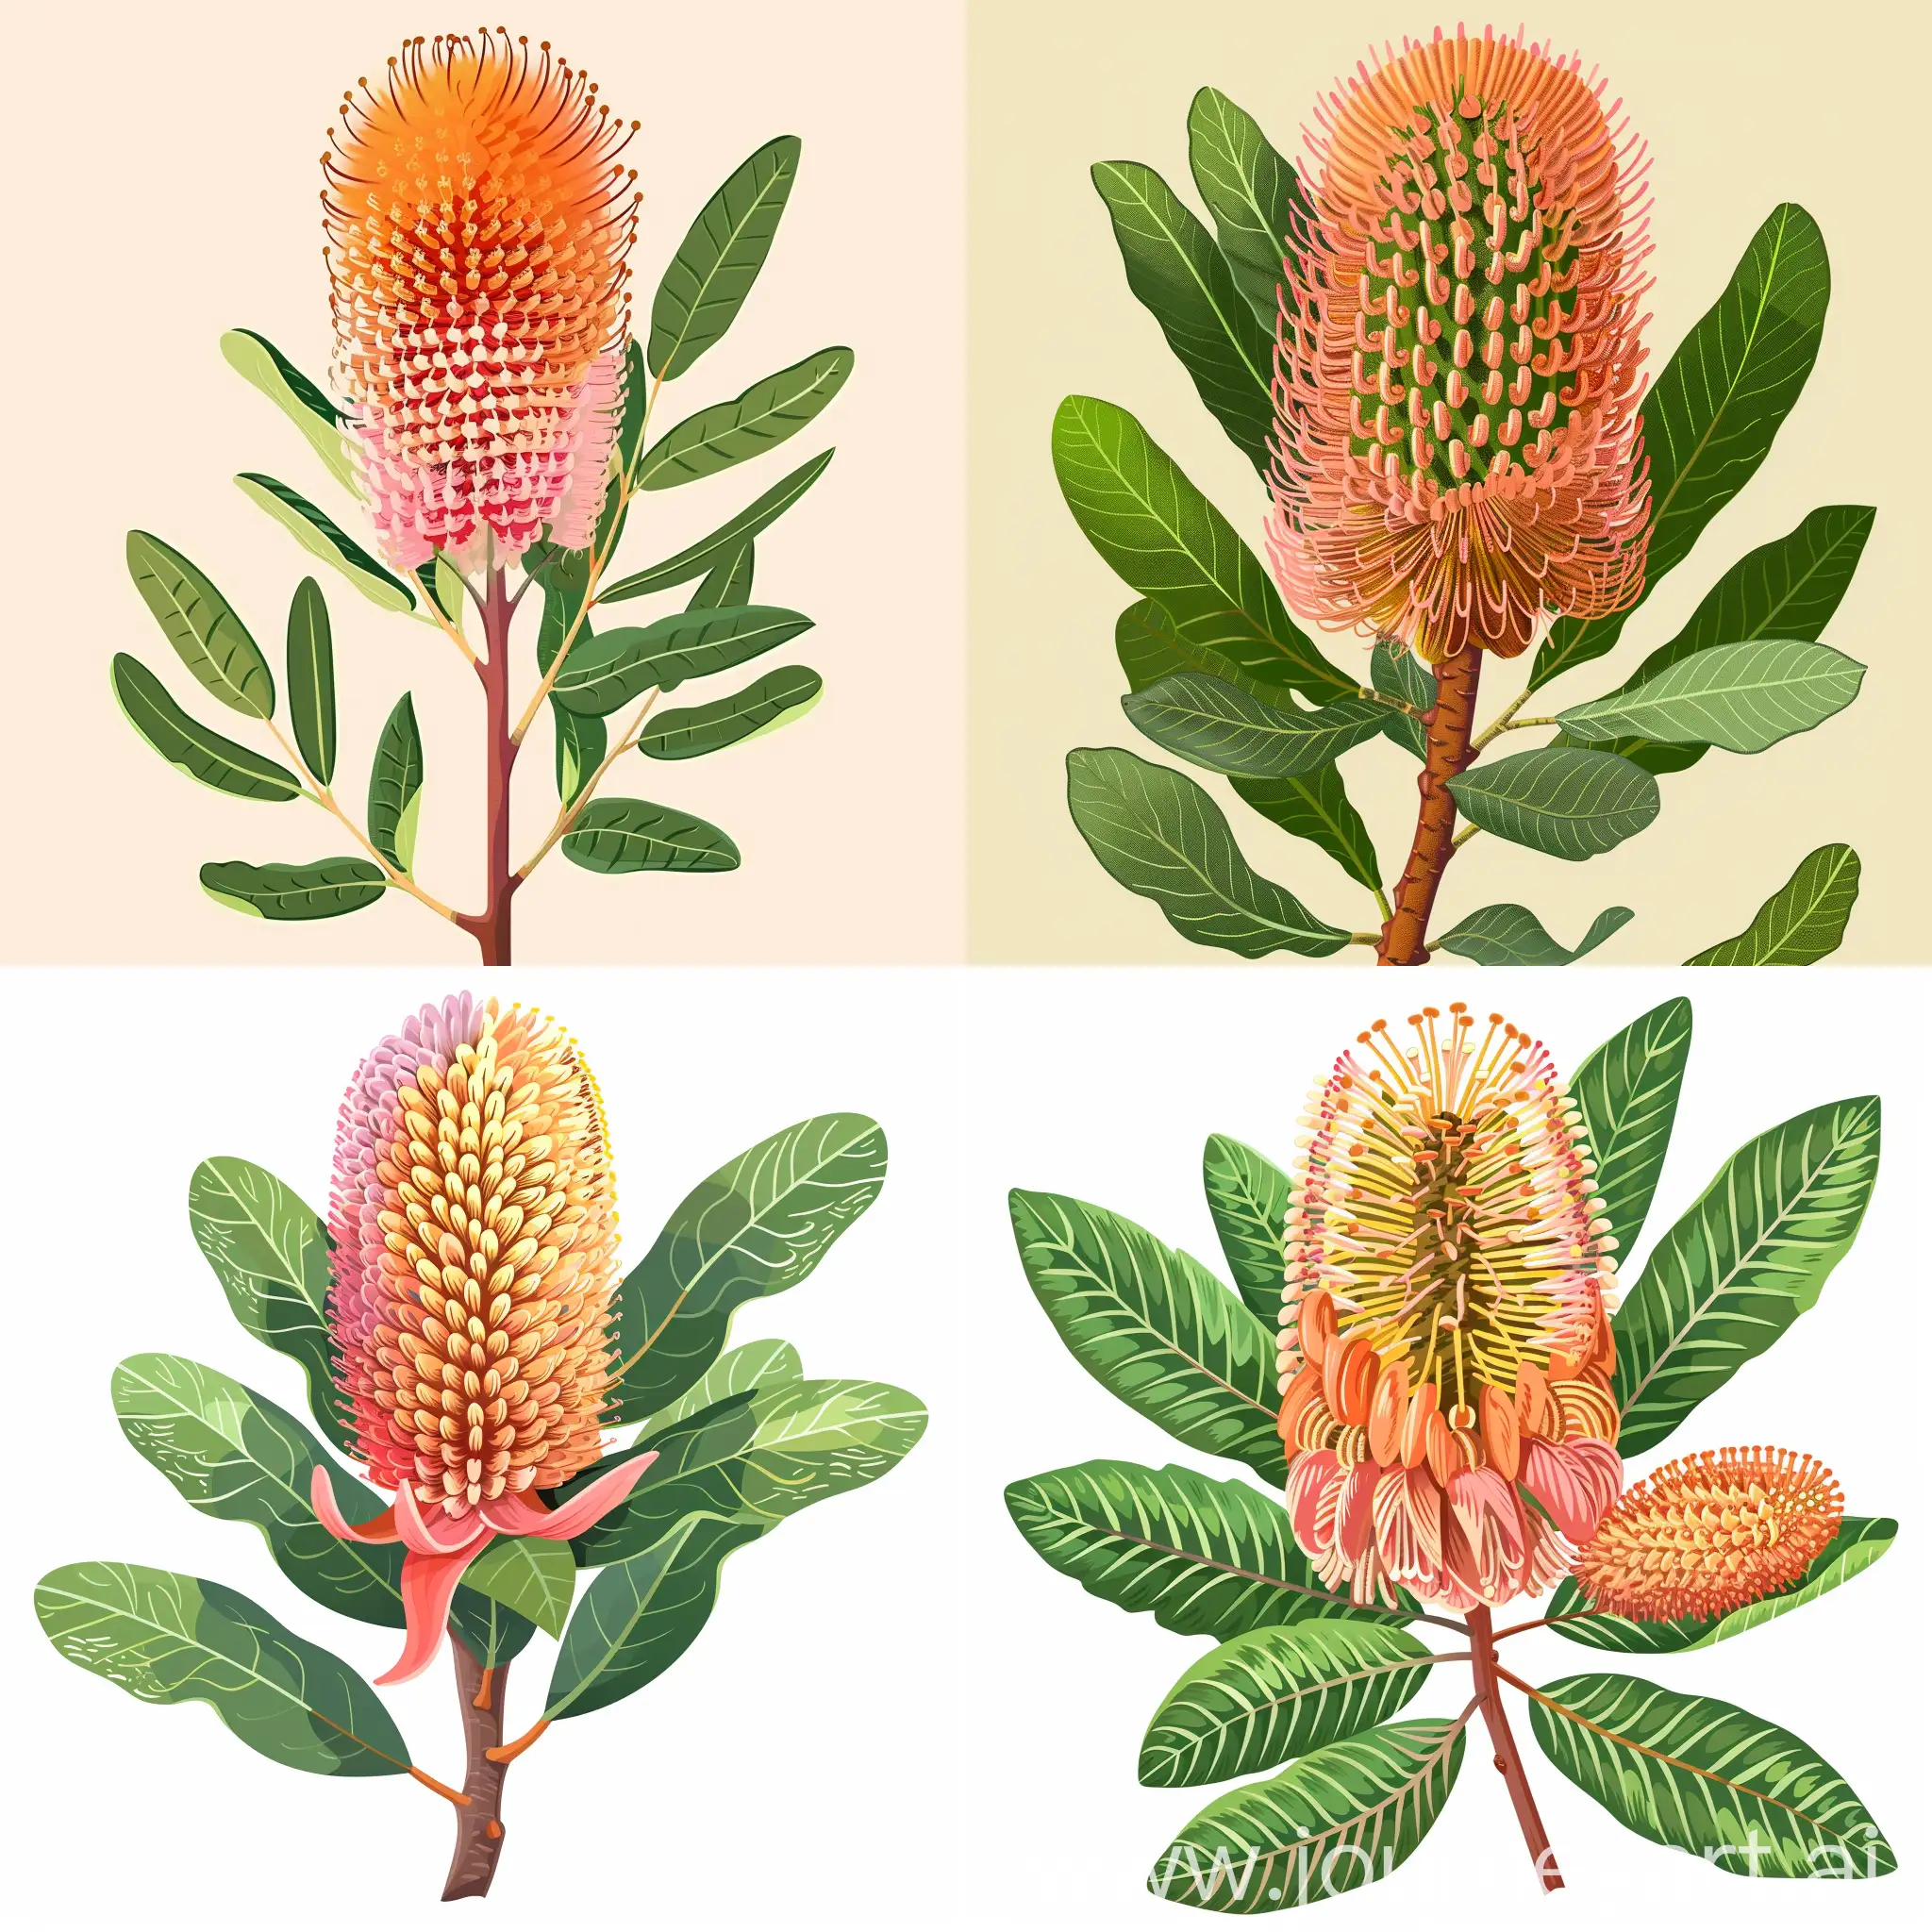 Cartoon of Australian banksia flower orange and pink in colour with green leaves